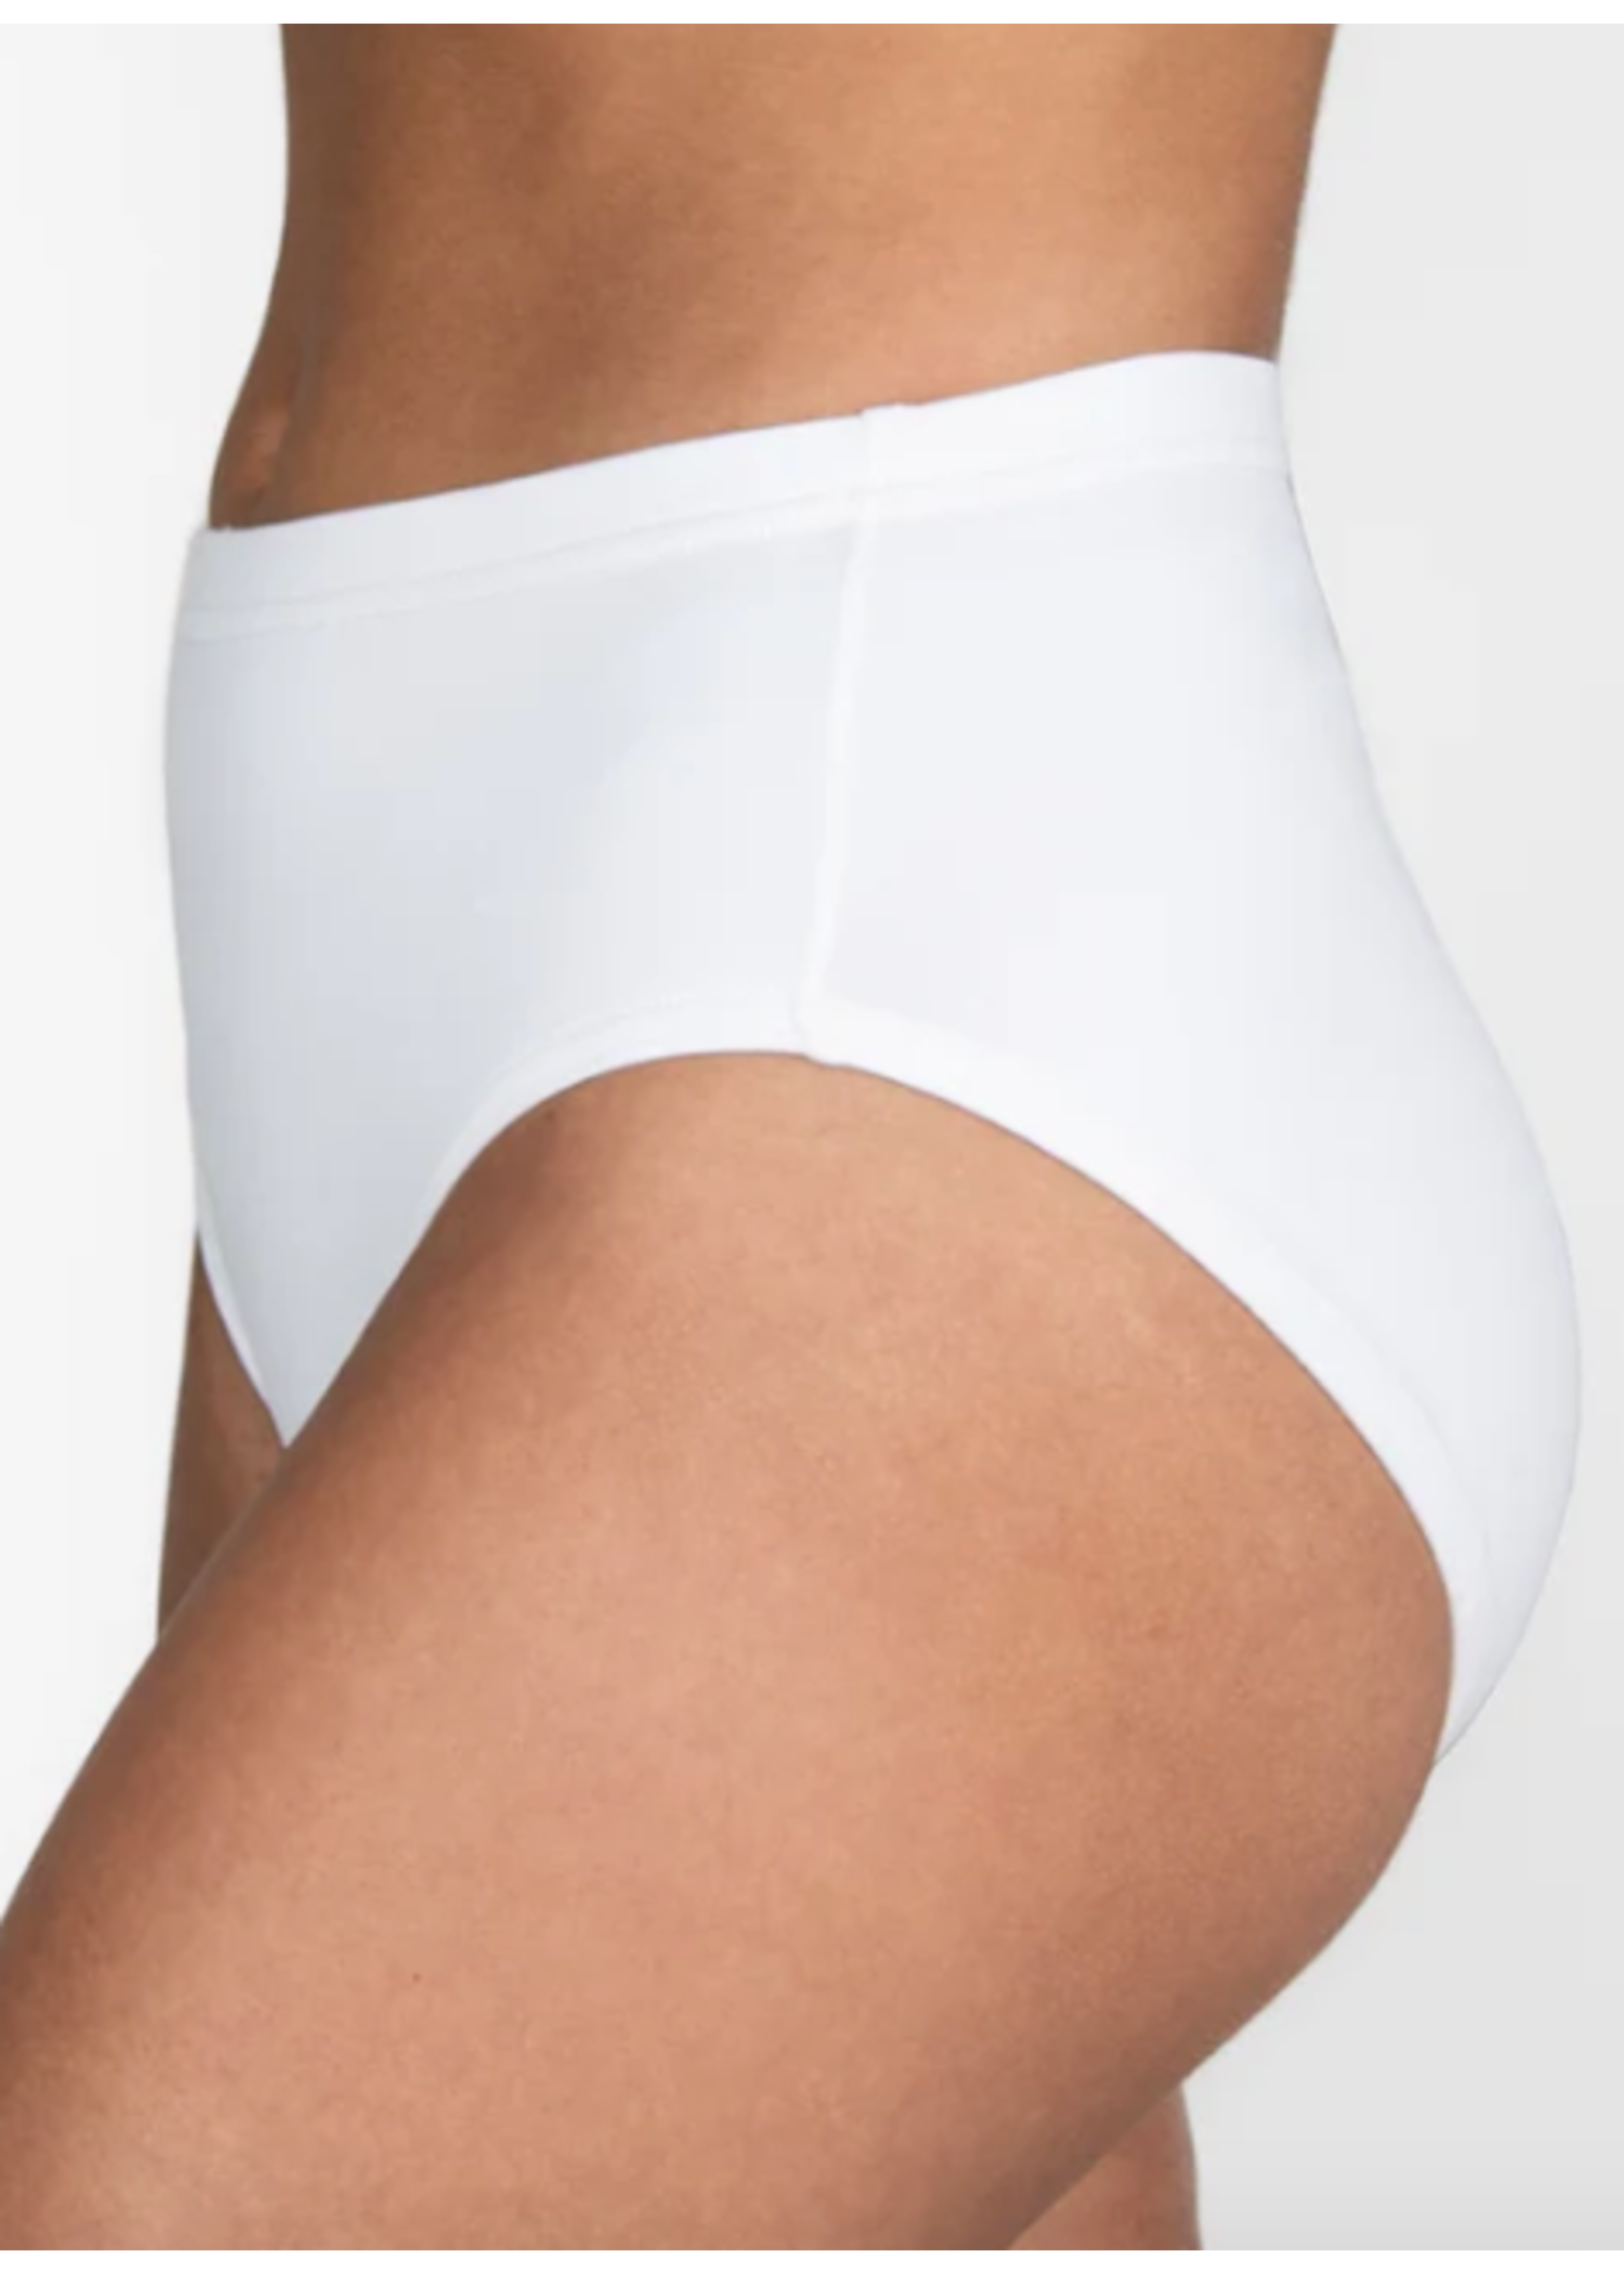 BODY WRAPPERS BWP289 ADULT TEAM BASIC TRUNK BRIEF